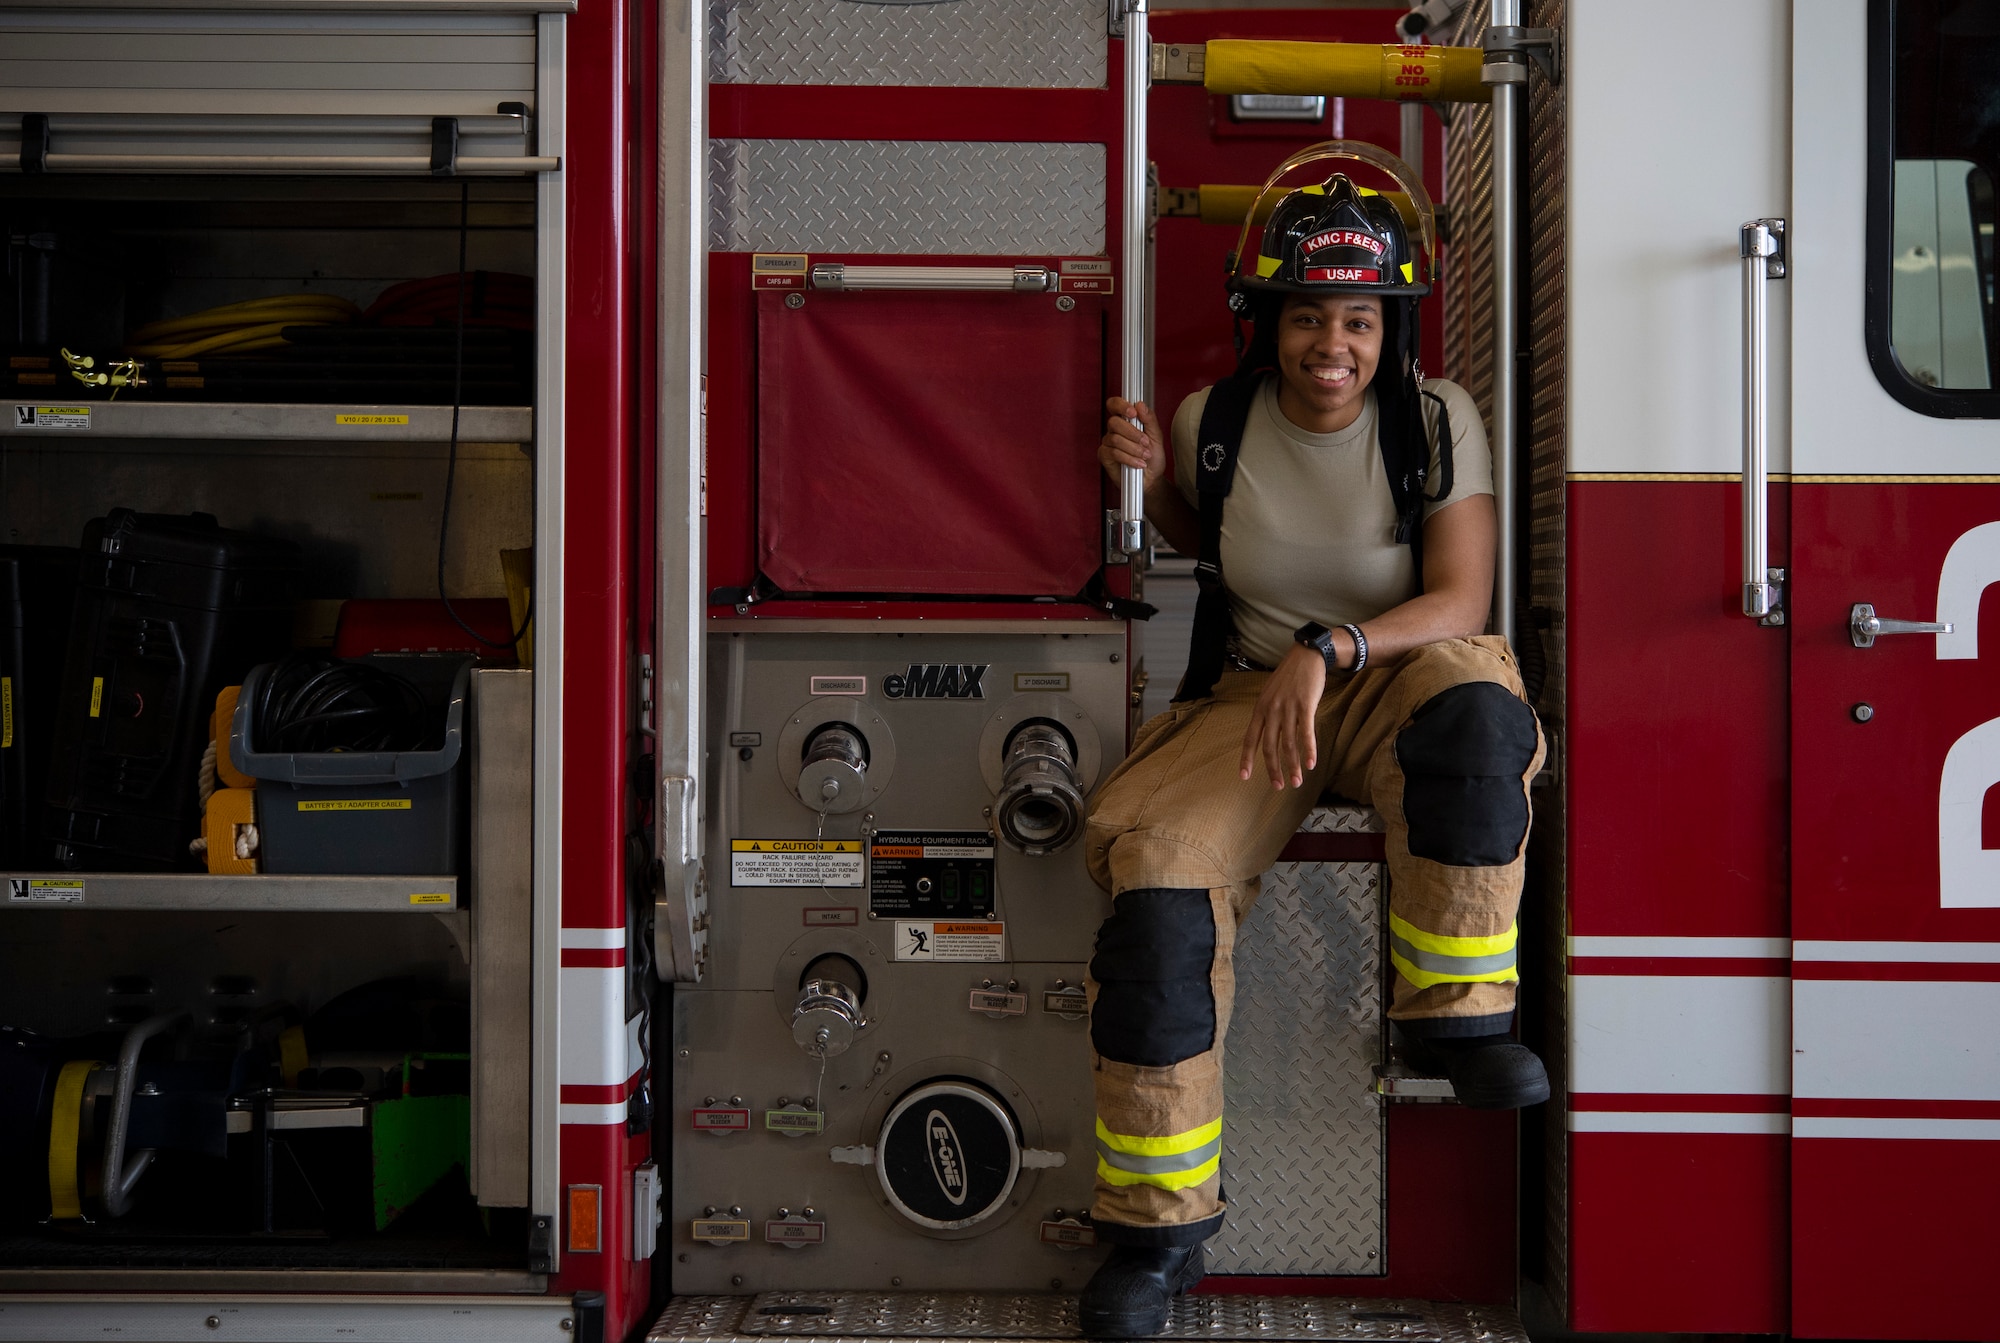 A photo of U.S. Air Force Airman 1st Class Kayla Jerido, 86th Civil Engineer Squadron fire protection apprentice, sitting on a fire truck at Vogelweh Military Complex, Germany, March 12, 2020.